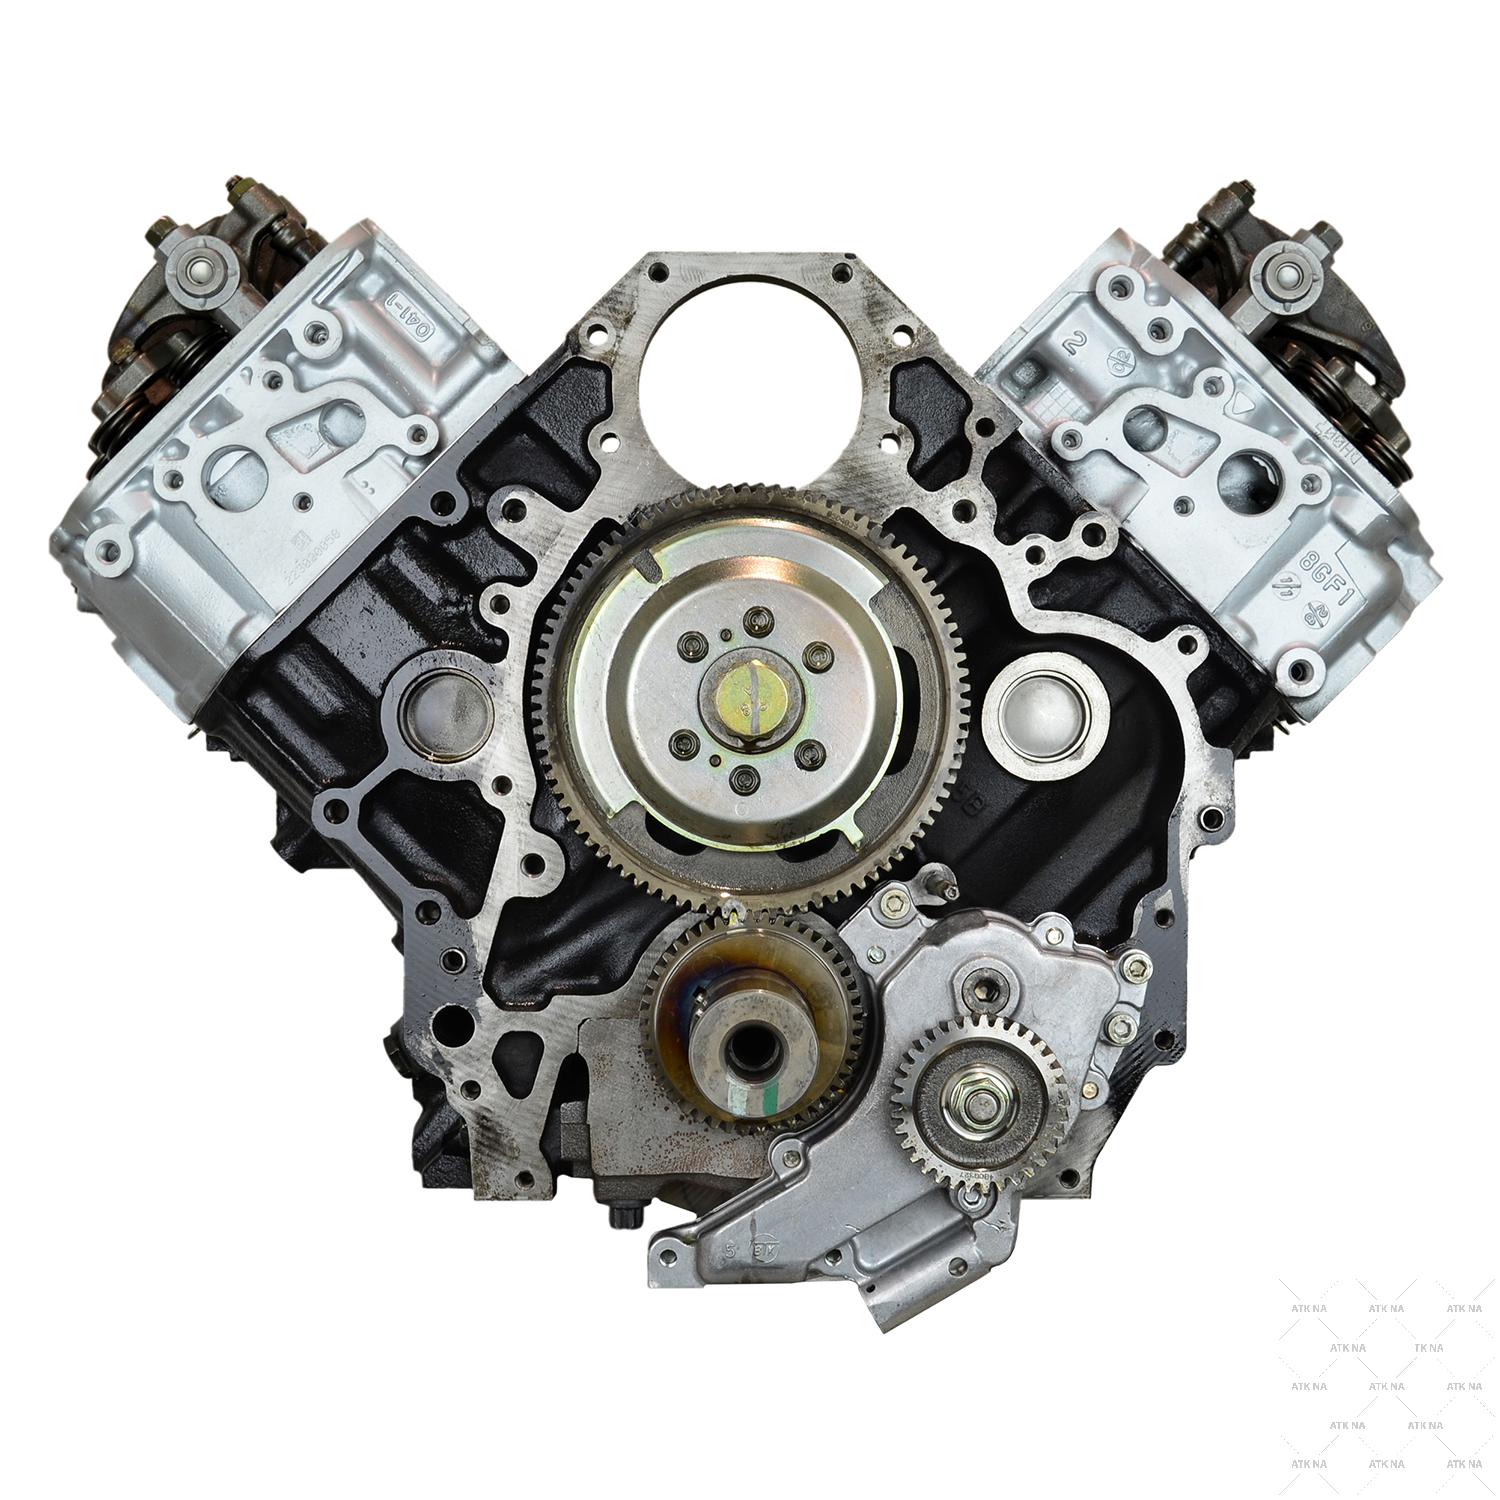 Remanufactured Crate Engine for 2001-2004 Chevy Silverado/GMC